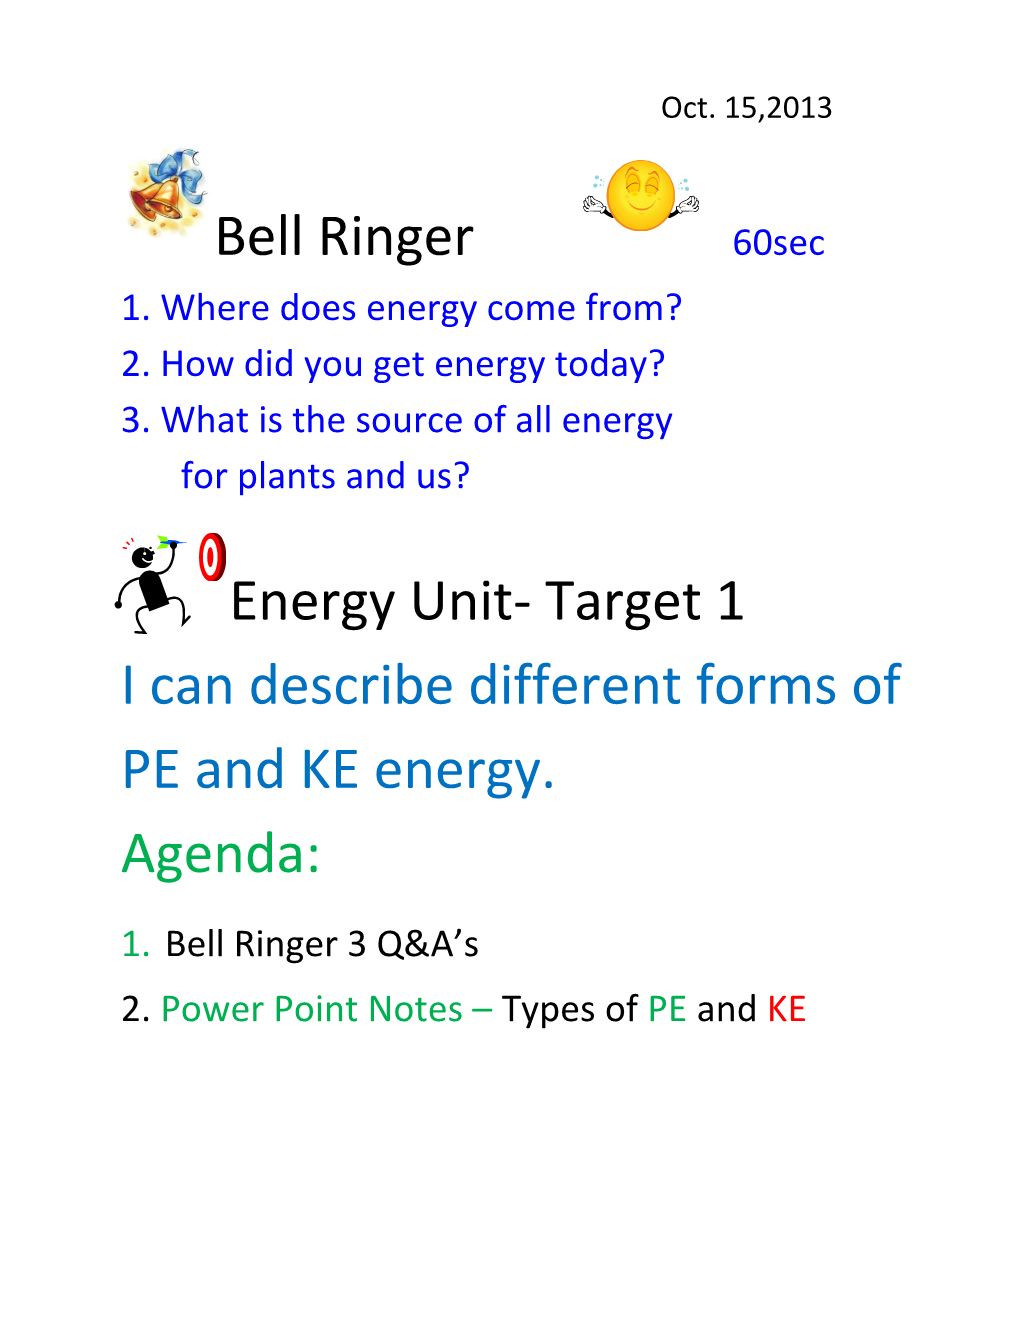 1. Where Does Energy Come From?